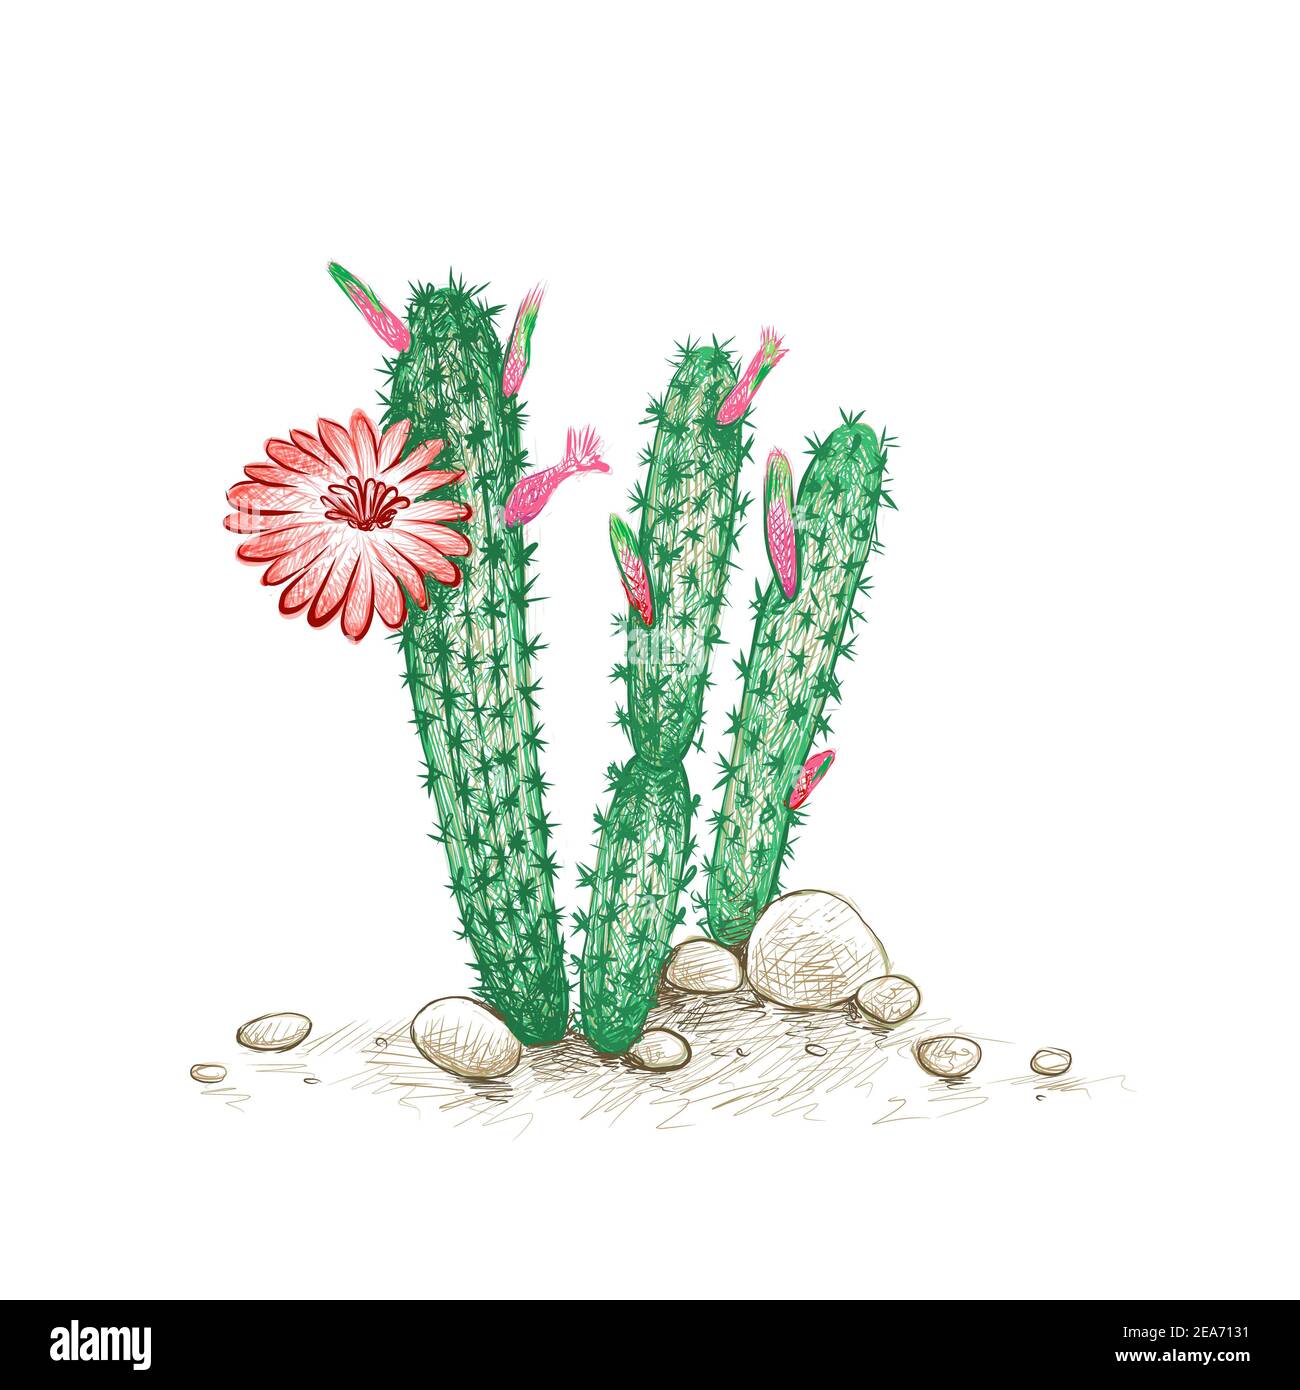 Illustration Hand Drawn Sketch of Cleistocactus with Red Flower for Garden Decoration. Stock Photo